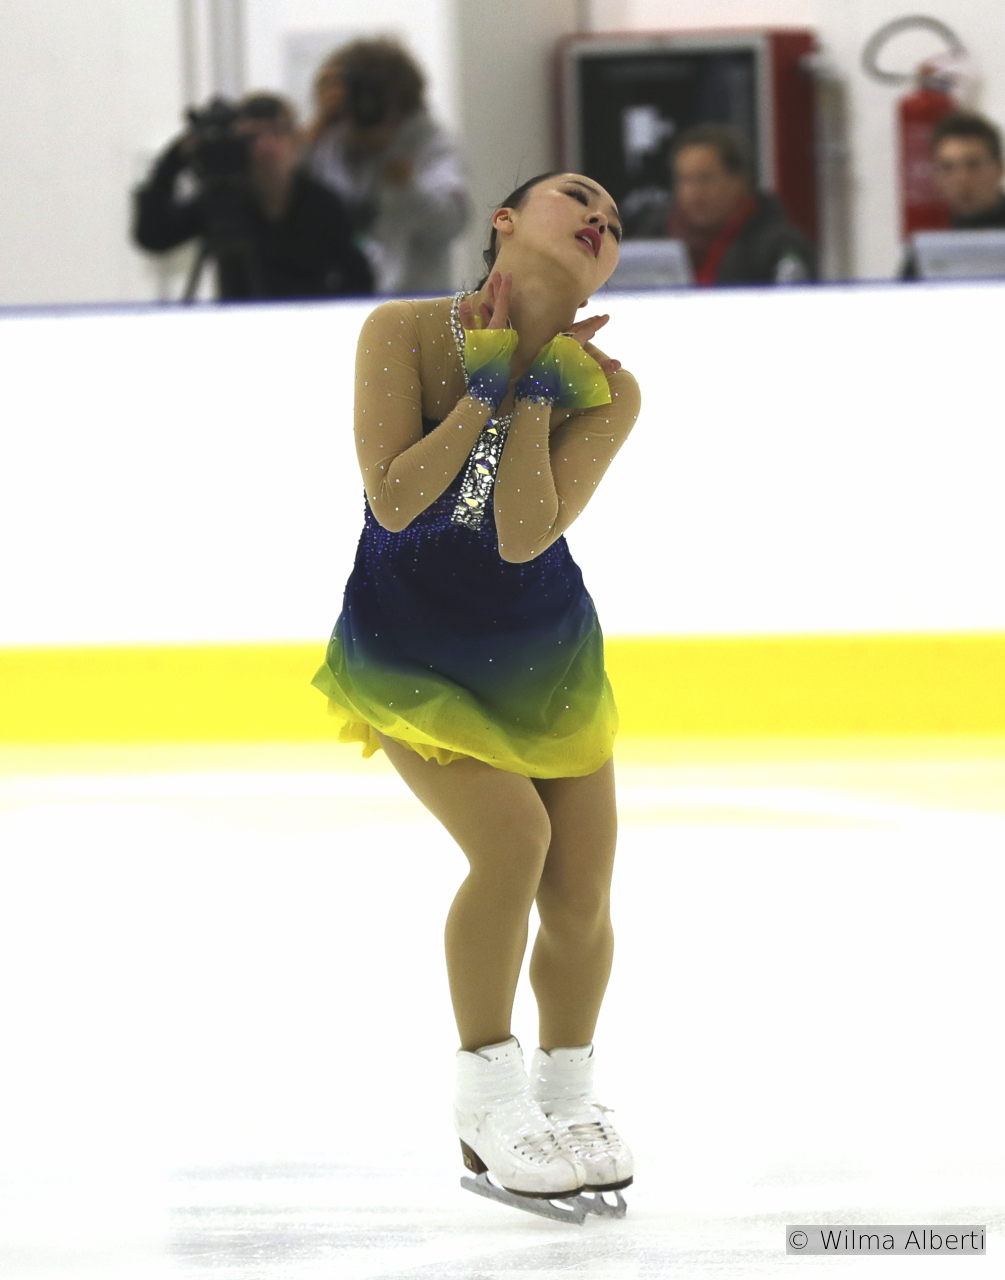 In her first season in seniors, Wakaba skates to music (by Ennio Morricone) from the movie „La Califfa, in her SP”; the routine has been choreographed by Shae-Lynn Bourne.